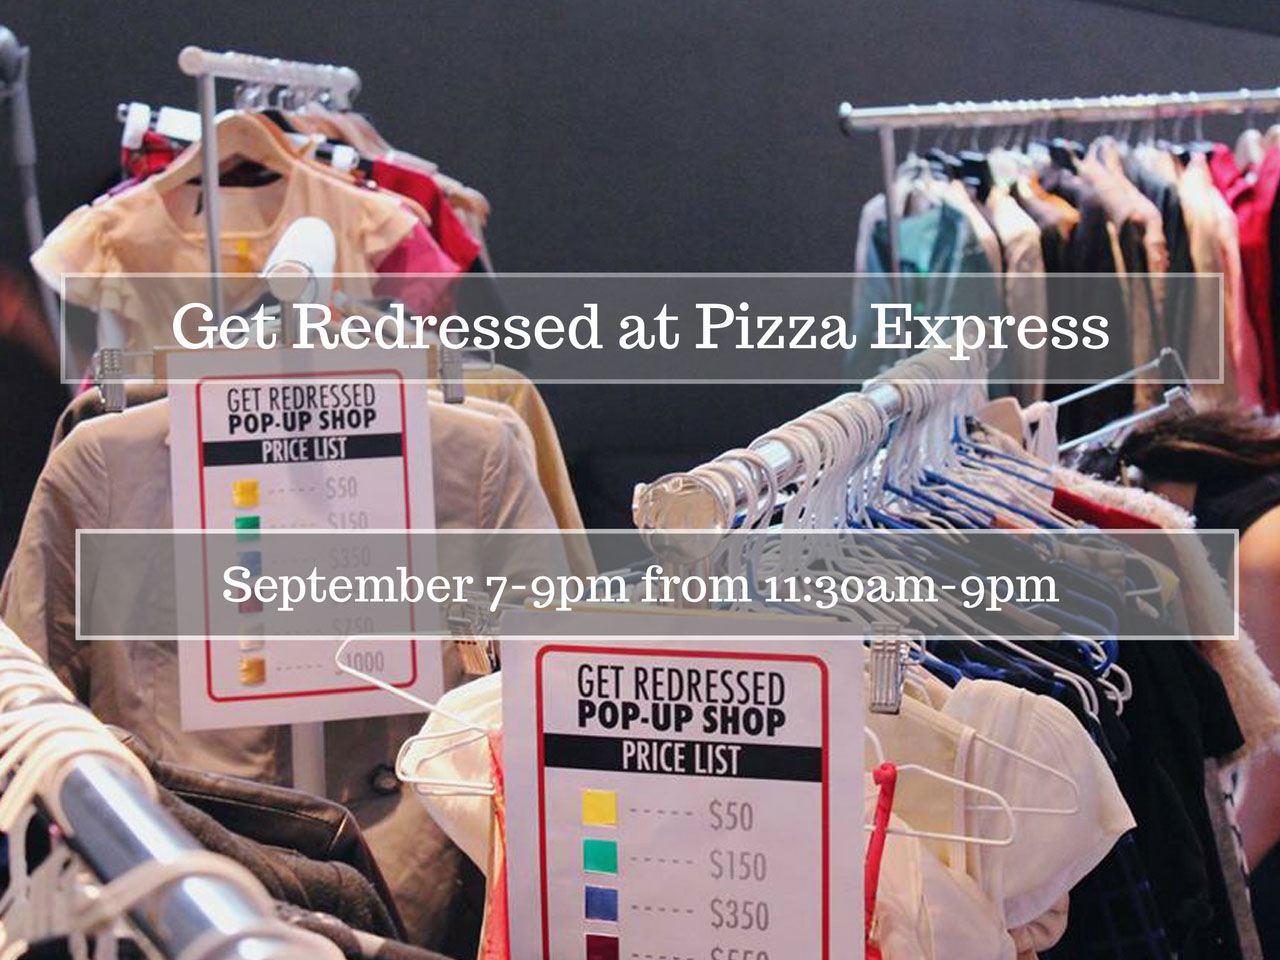 Get Redressed 7-9 Sept at Pizza Express